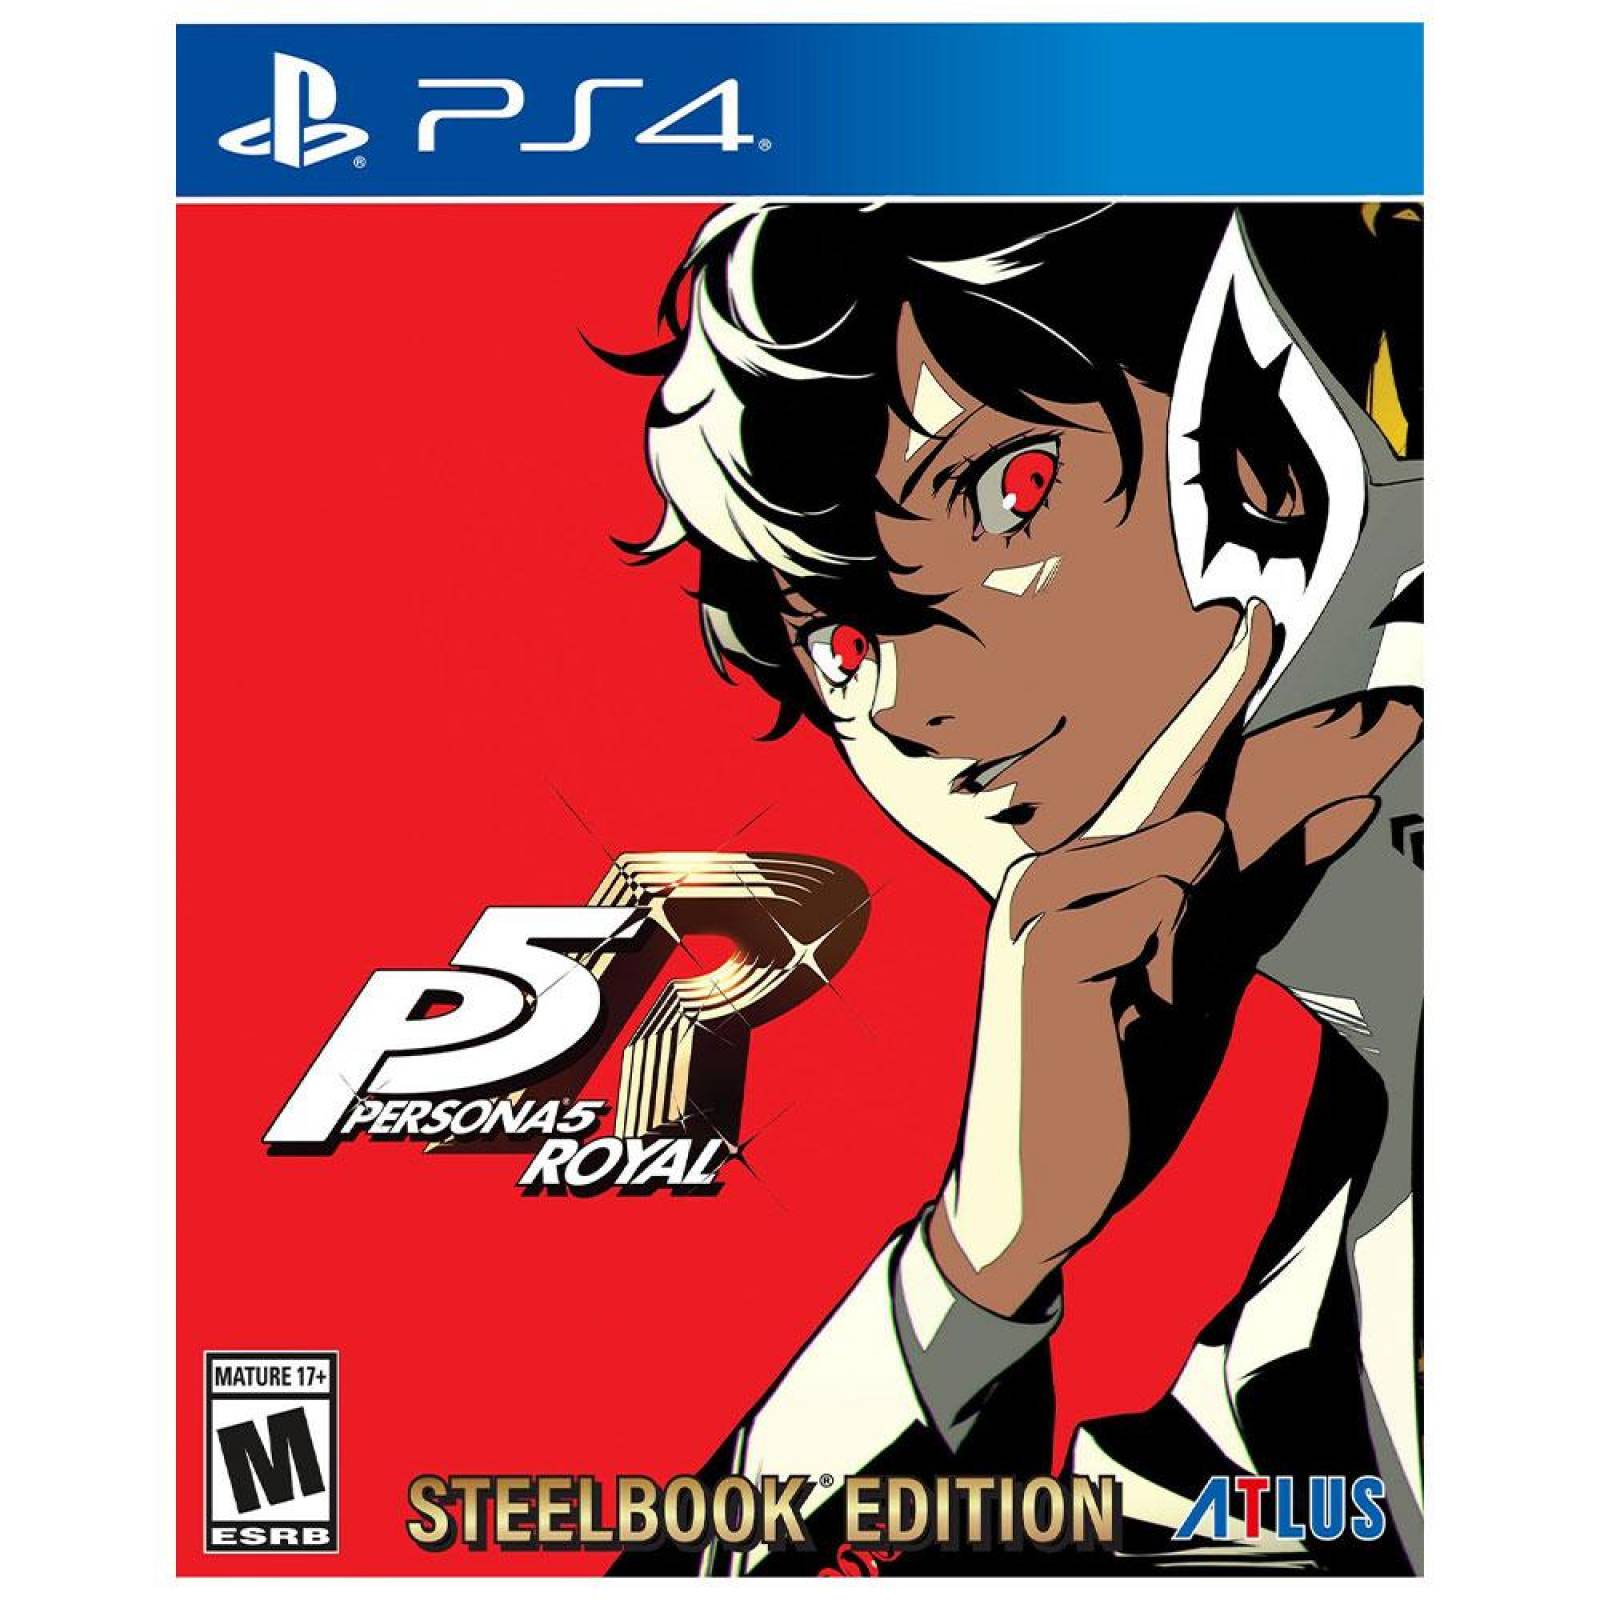 Persona 5 Royal Steelbook Launch Edition Ps4 - S001 